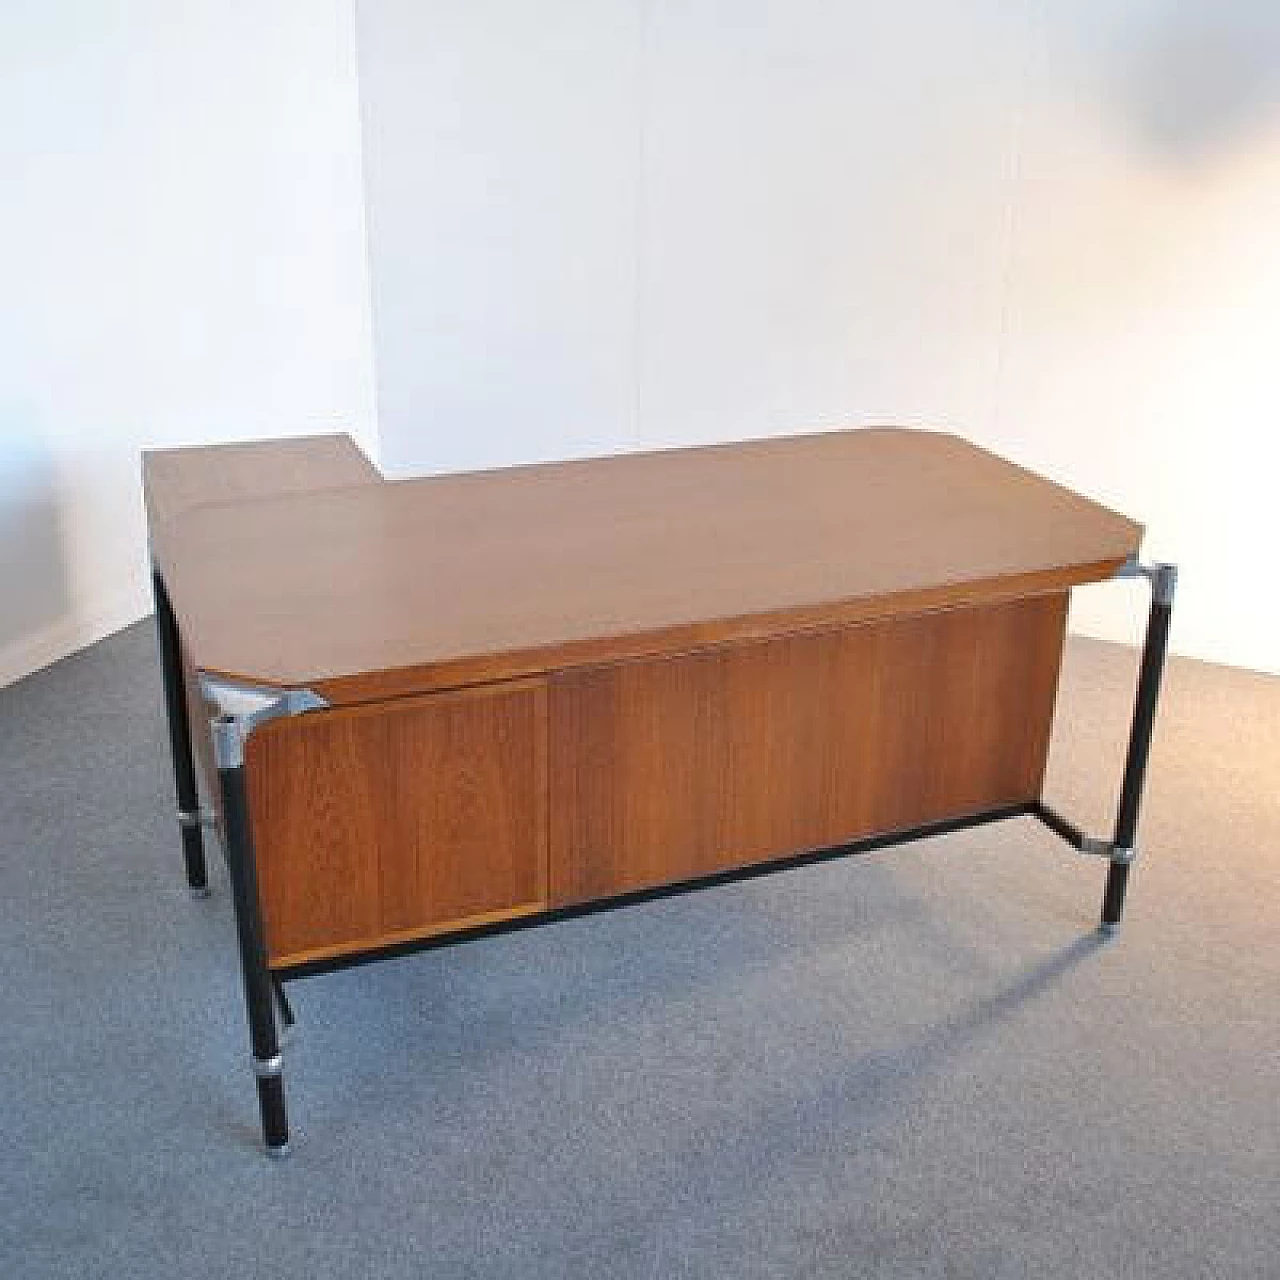 Executive desk by Ico Parisi for MIM Rome, 1950s 1412251